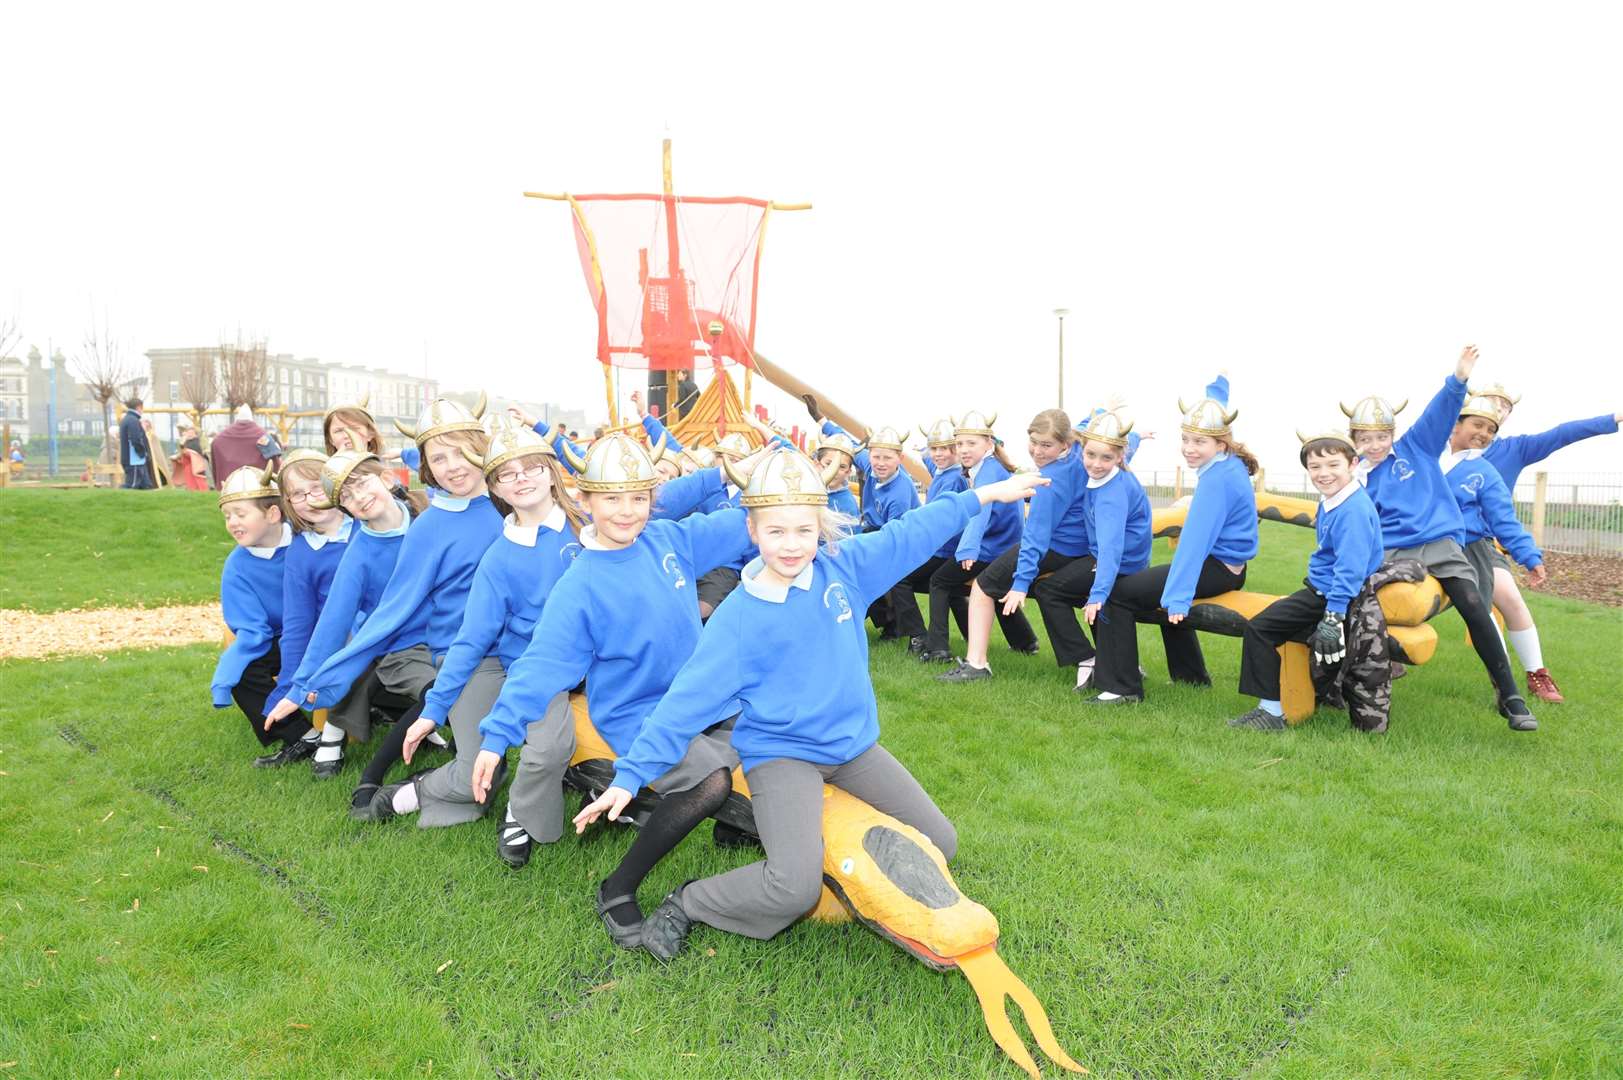 Youngsters from Cliftonville Primary School trying out the giant balancing snake at the area's new Viking-themed playground when it opened in 2009